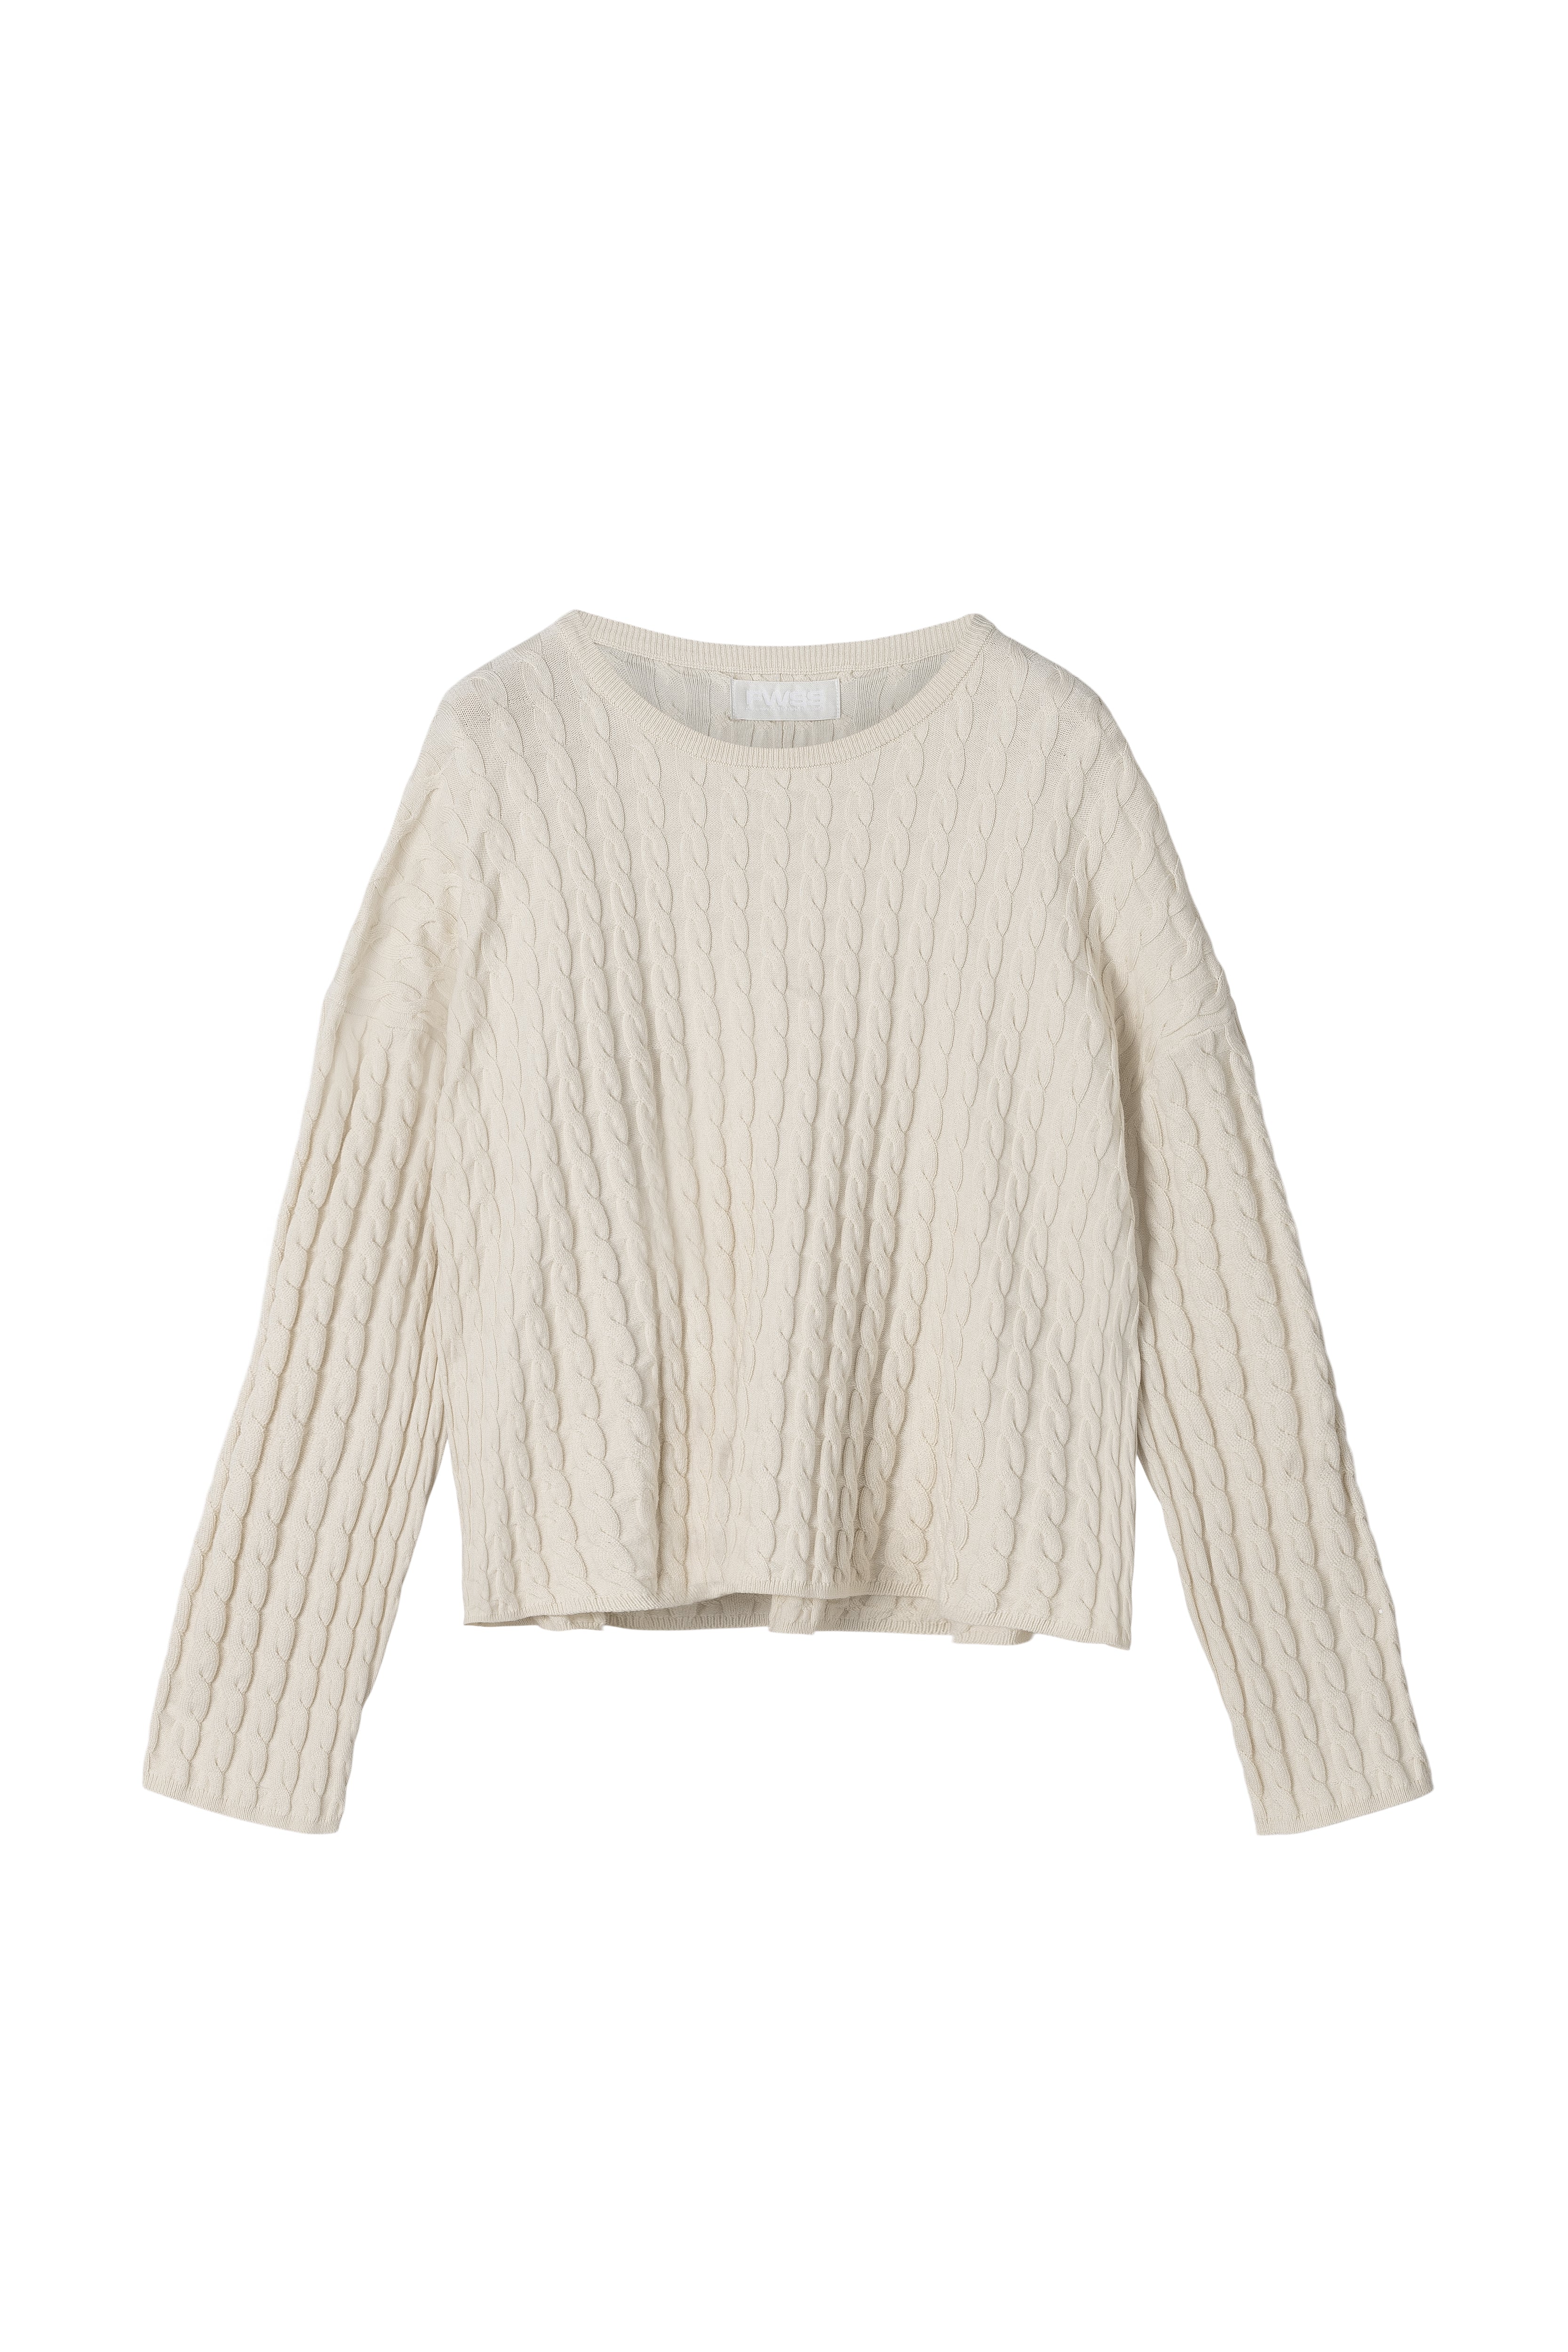 Crew Cable Knit Sweater - Whipped Cream